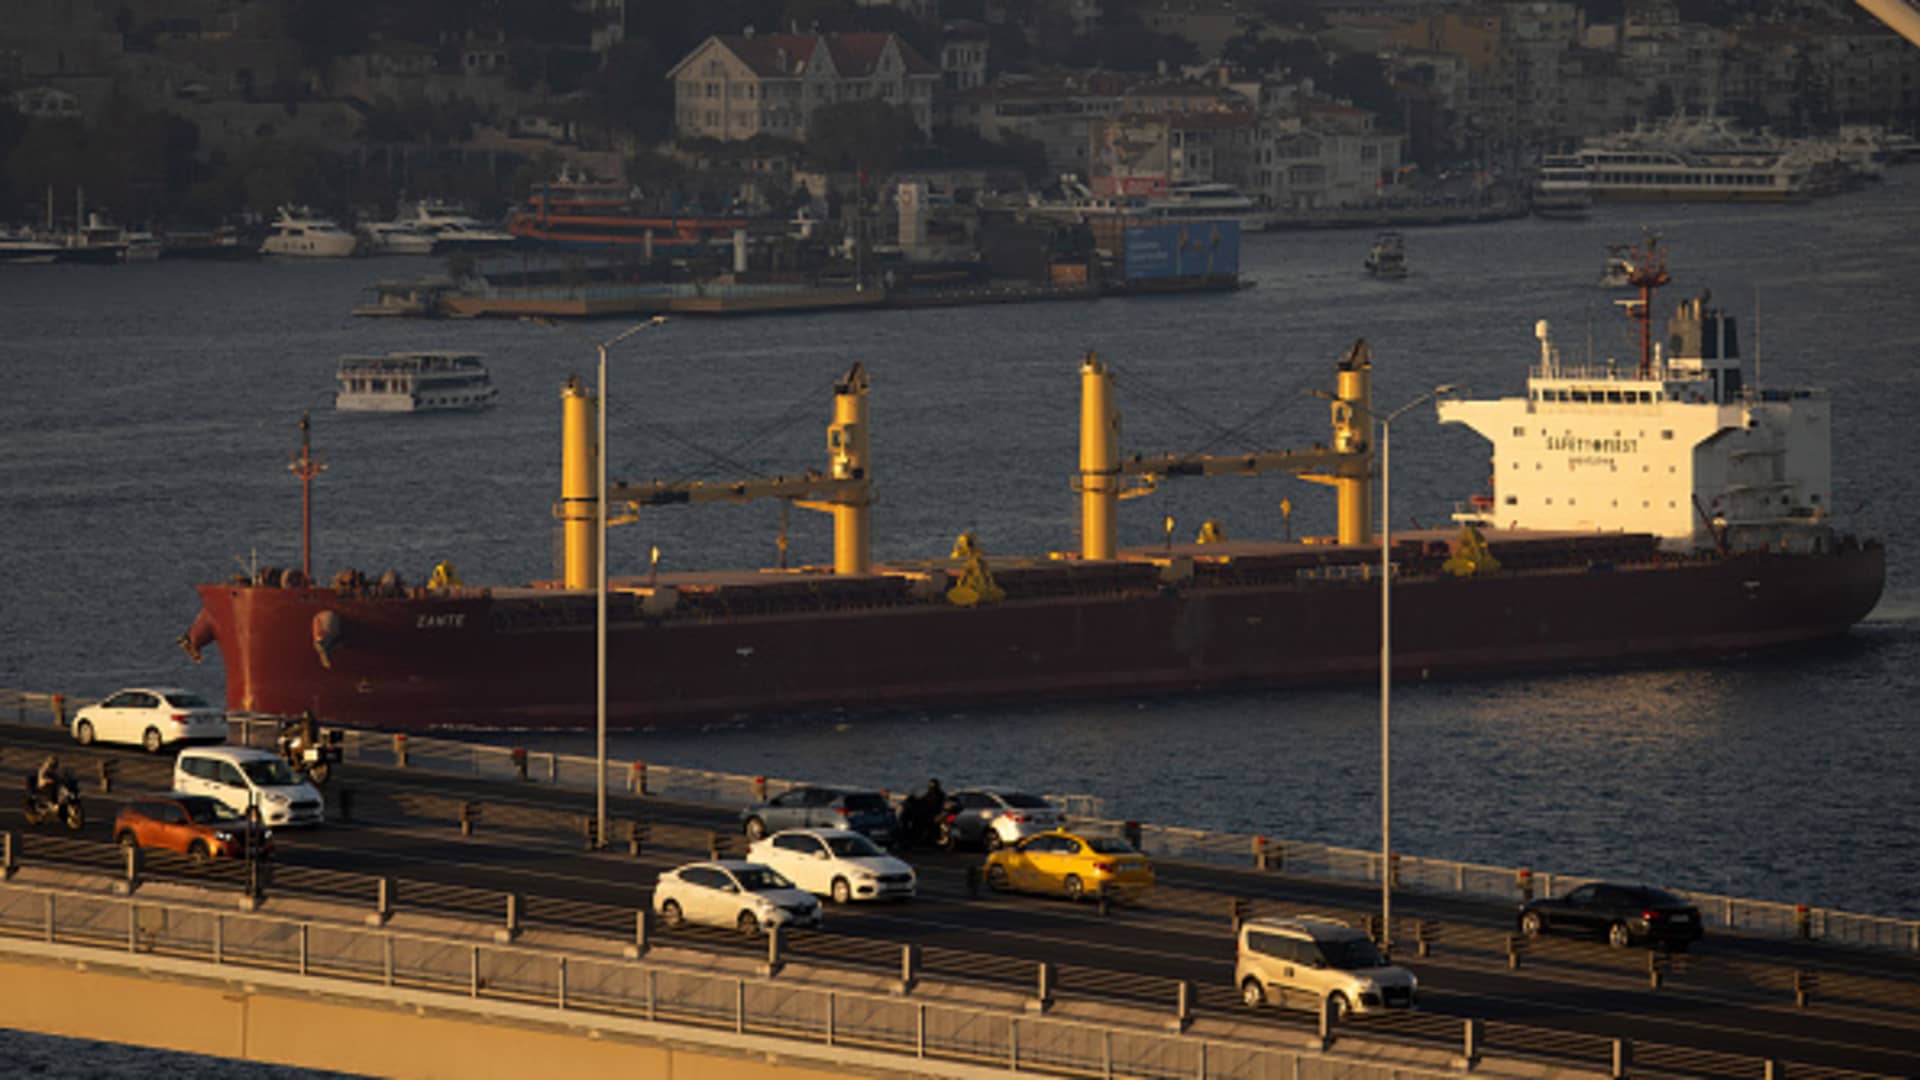 The Malta-flagged bulk carrier Zante en route to Belgium transits the Bosporus carrying rapeseed from Ukraine after being held at the entrance of the Bosporus because Russia pulled out of the Black Sea Grain agreement, on Nov. 2, 2022 in Istanbul, Turkey.